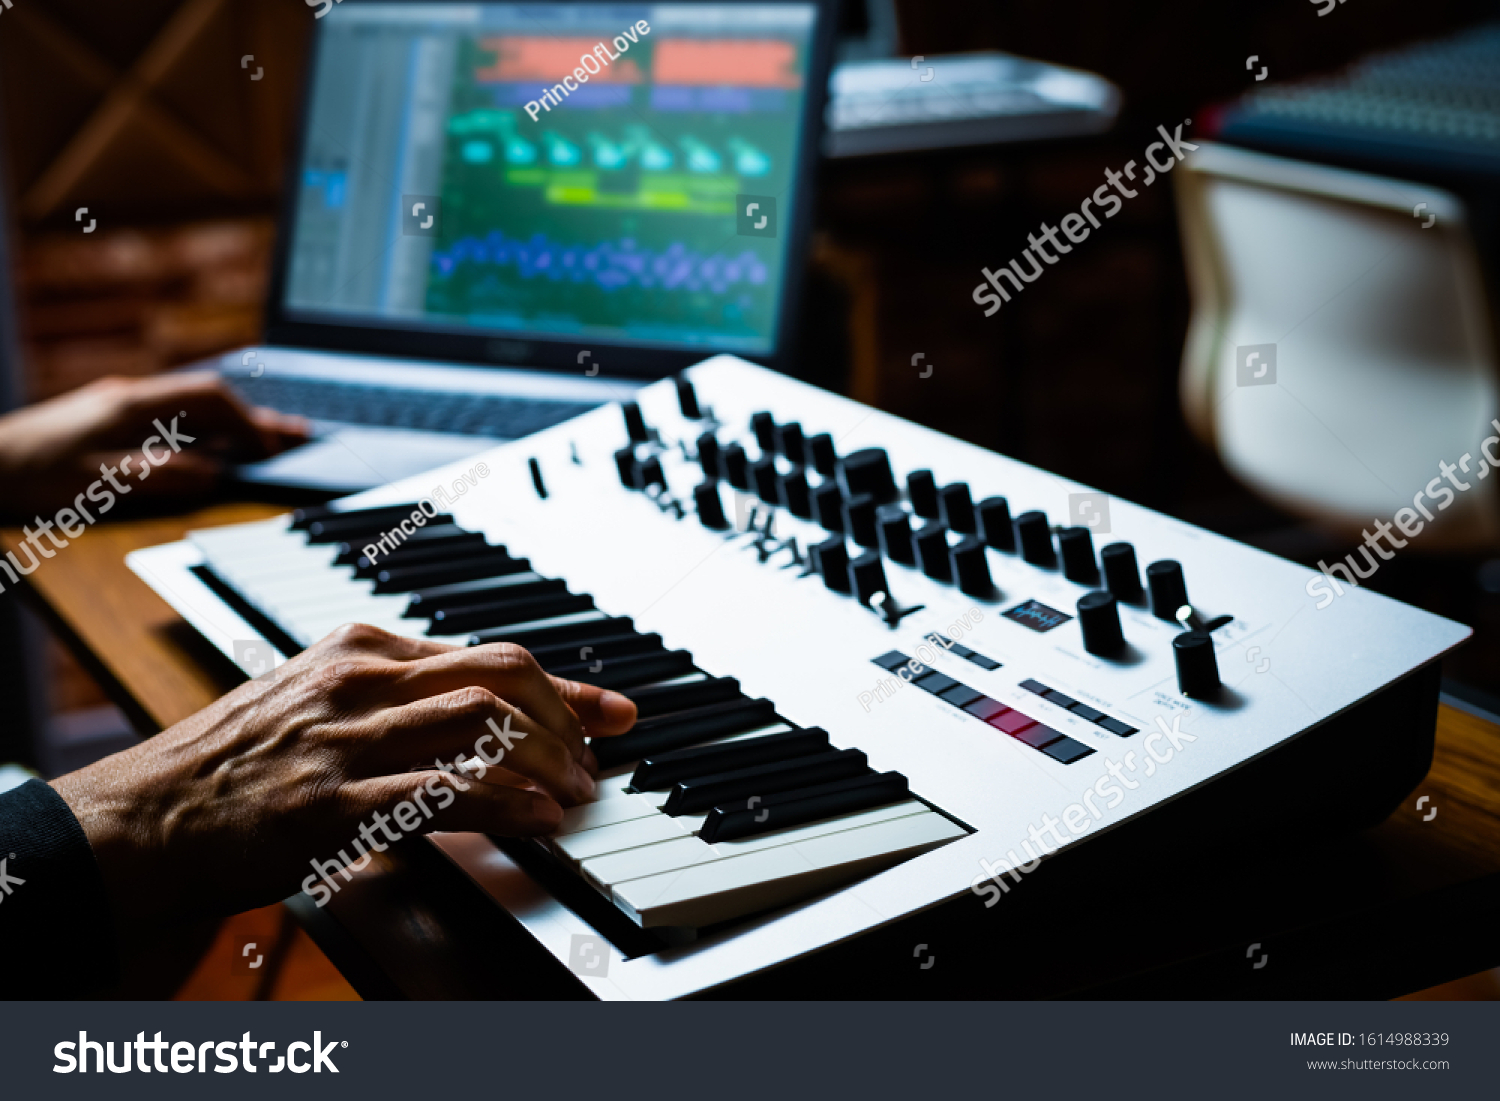 stock-photo-male-professional-musician-playing-keyboard-synthesizer-for-recording-midi-track-on-laptop-computer-1614988339